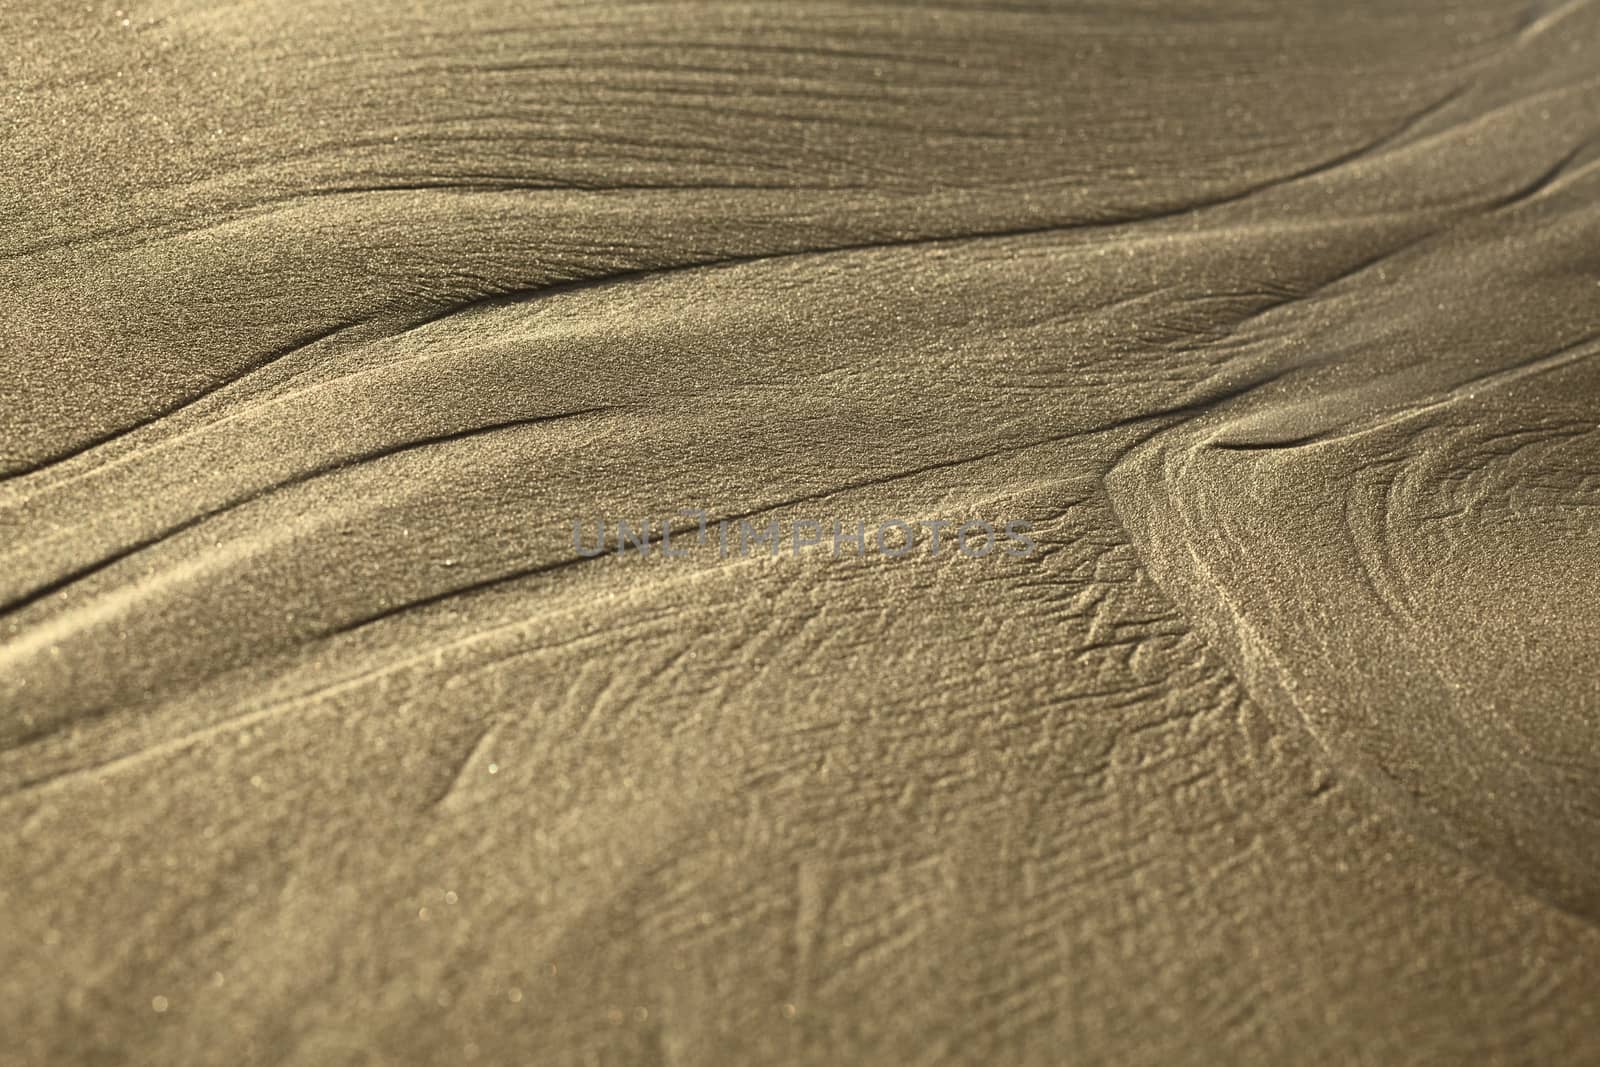 Lines formed by the water on sandy beach in the small town of Mancora in Northern Peru (Selective Focus, Focus where one line branches out into two) 